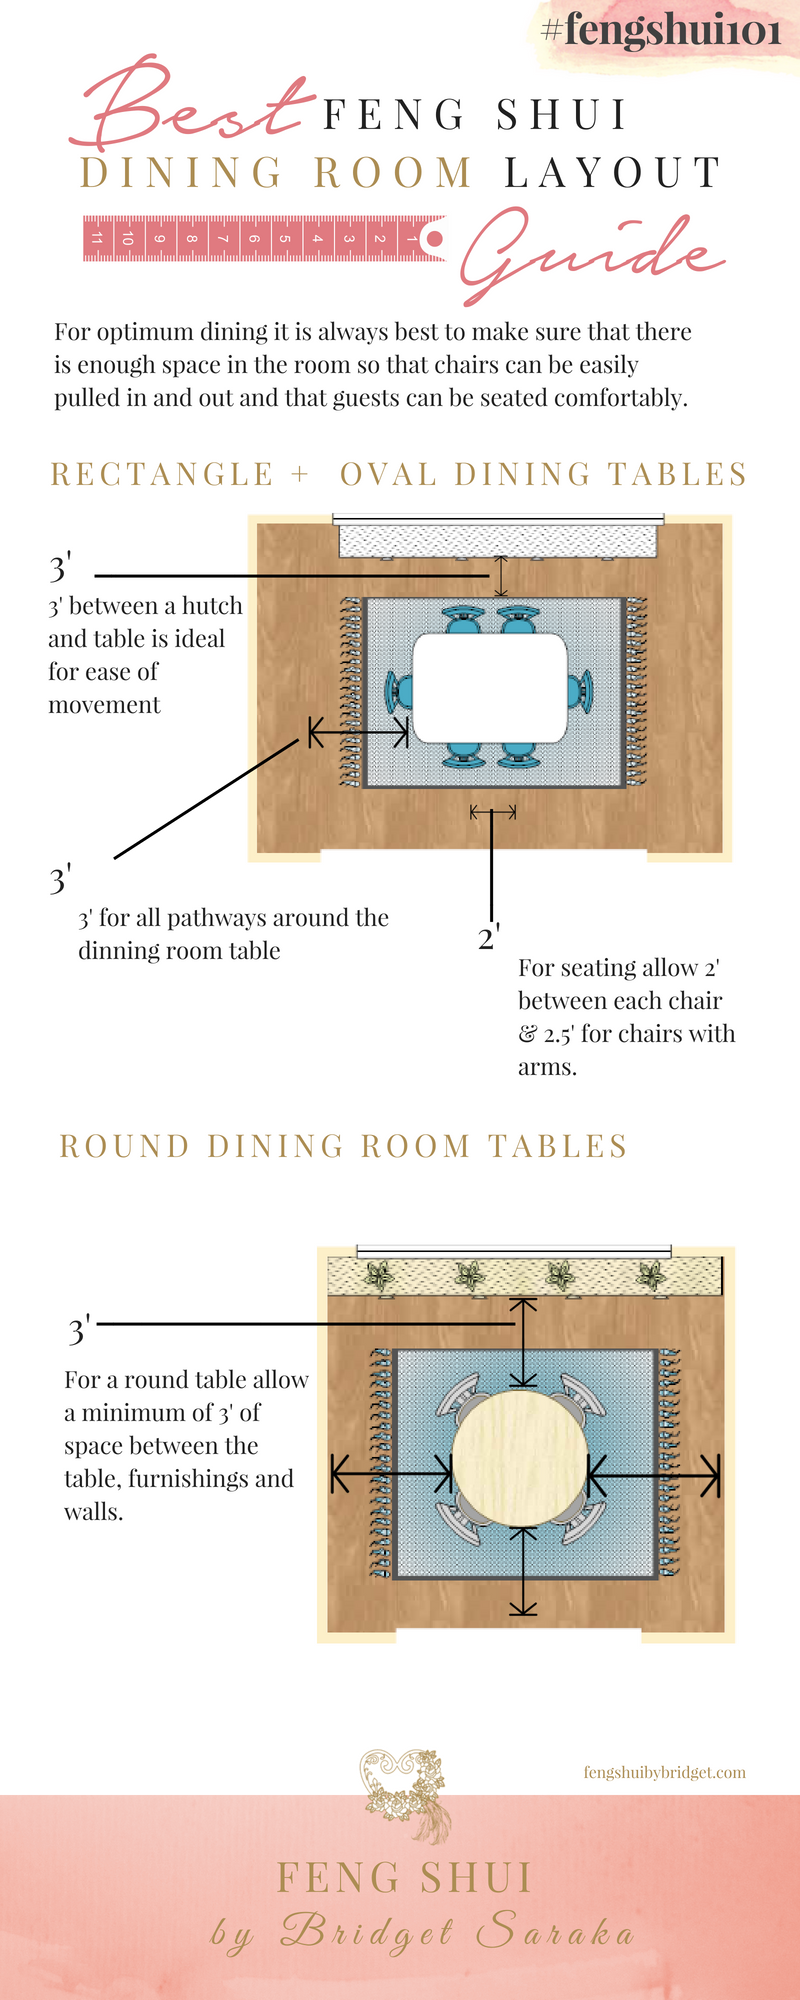 Best Feng Shui Dining Room Layout Guide Fengshui101 Feng